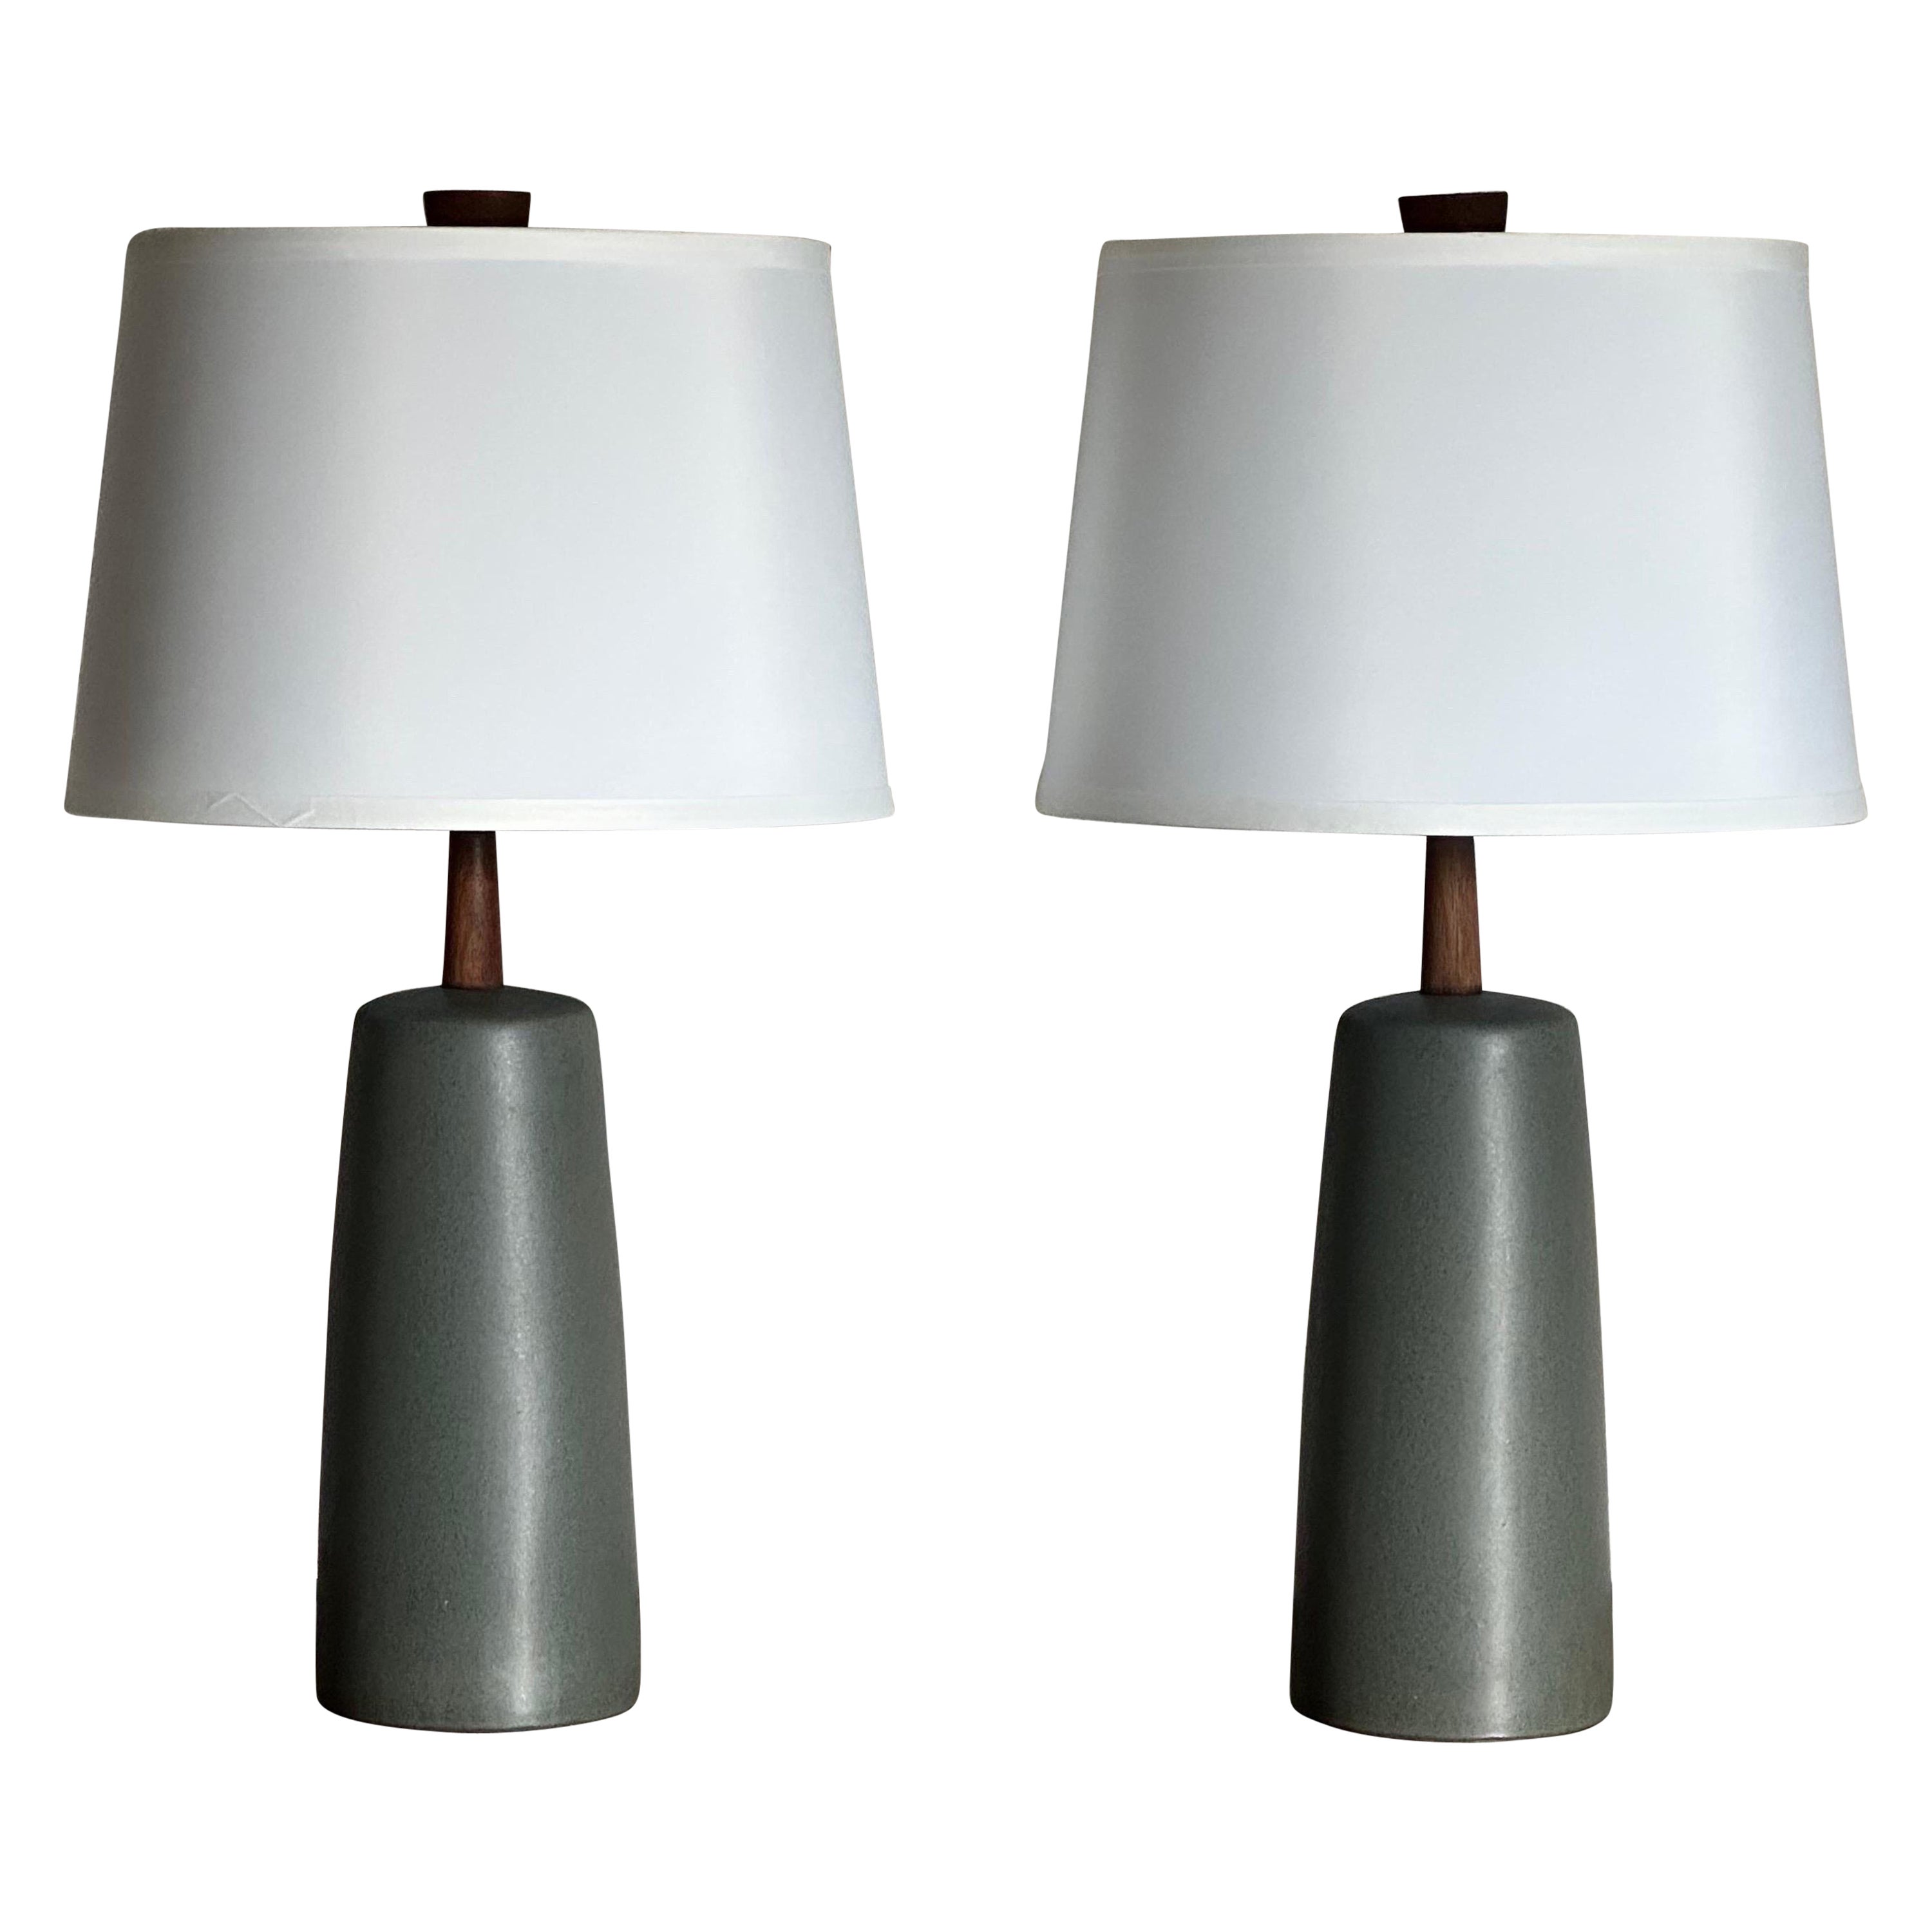 Martz Lamps by Jane and Gordon Martz for Marshall Studios, Ceramic Table Lamps